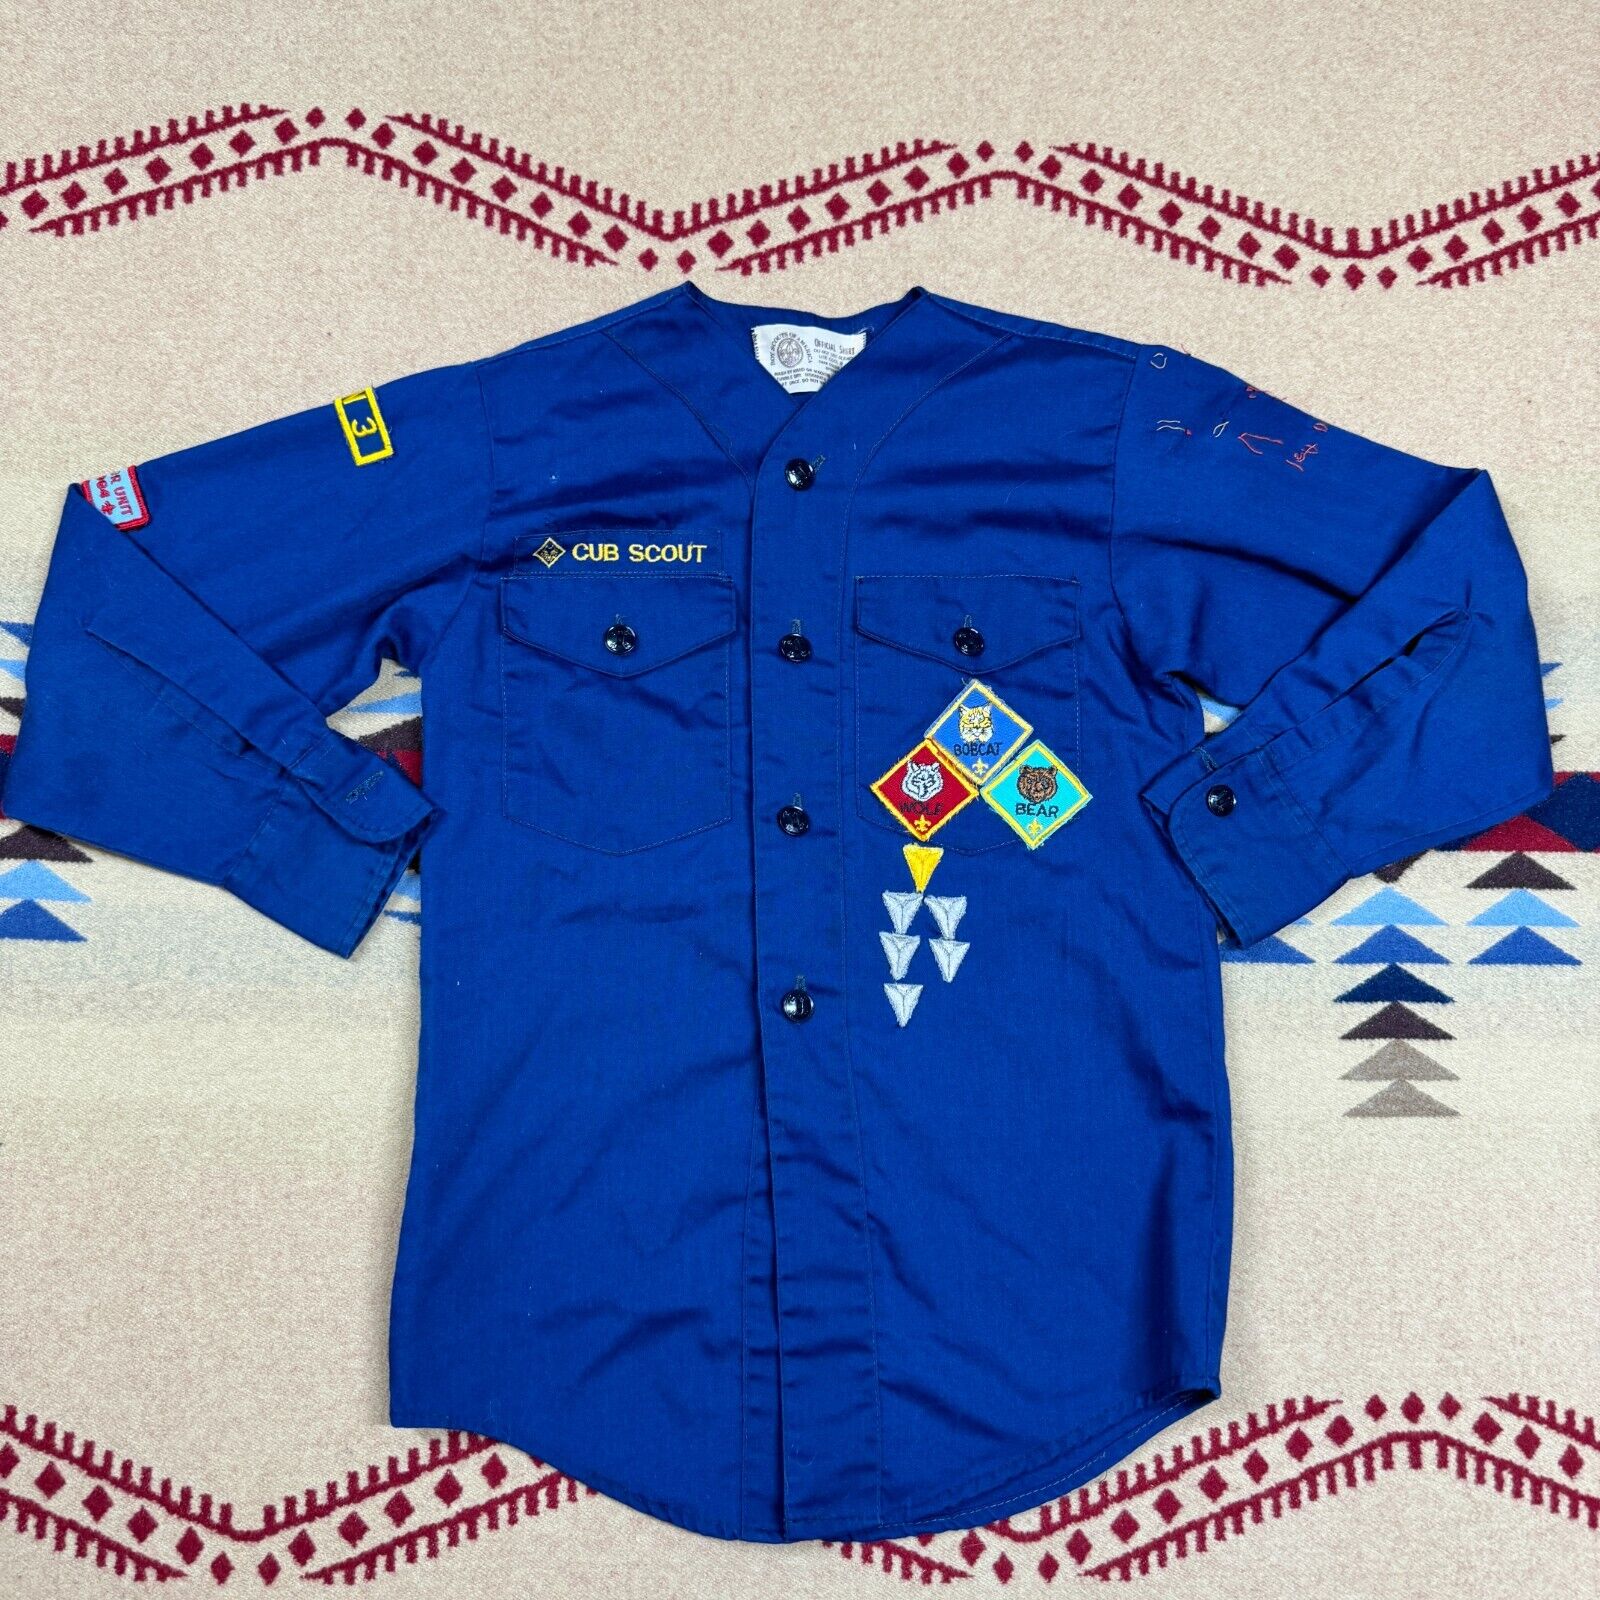 Vintage Official Boy Scouts of America Cub Scout Shirt With Patches Blue Small